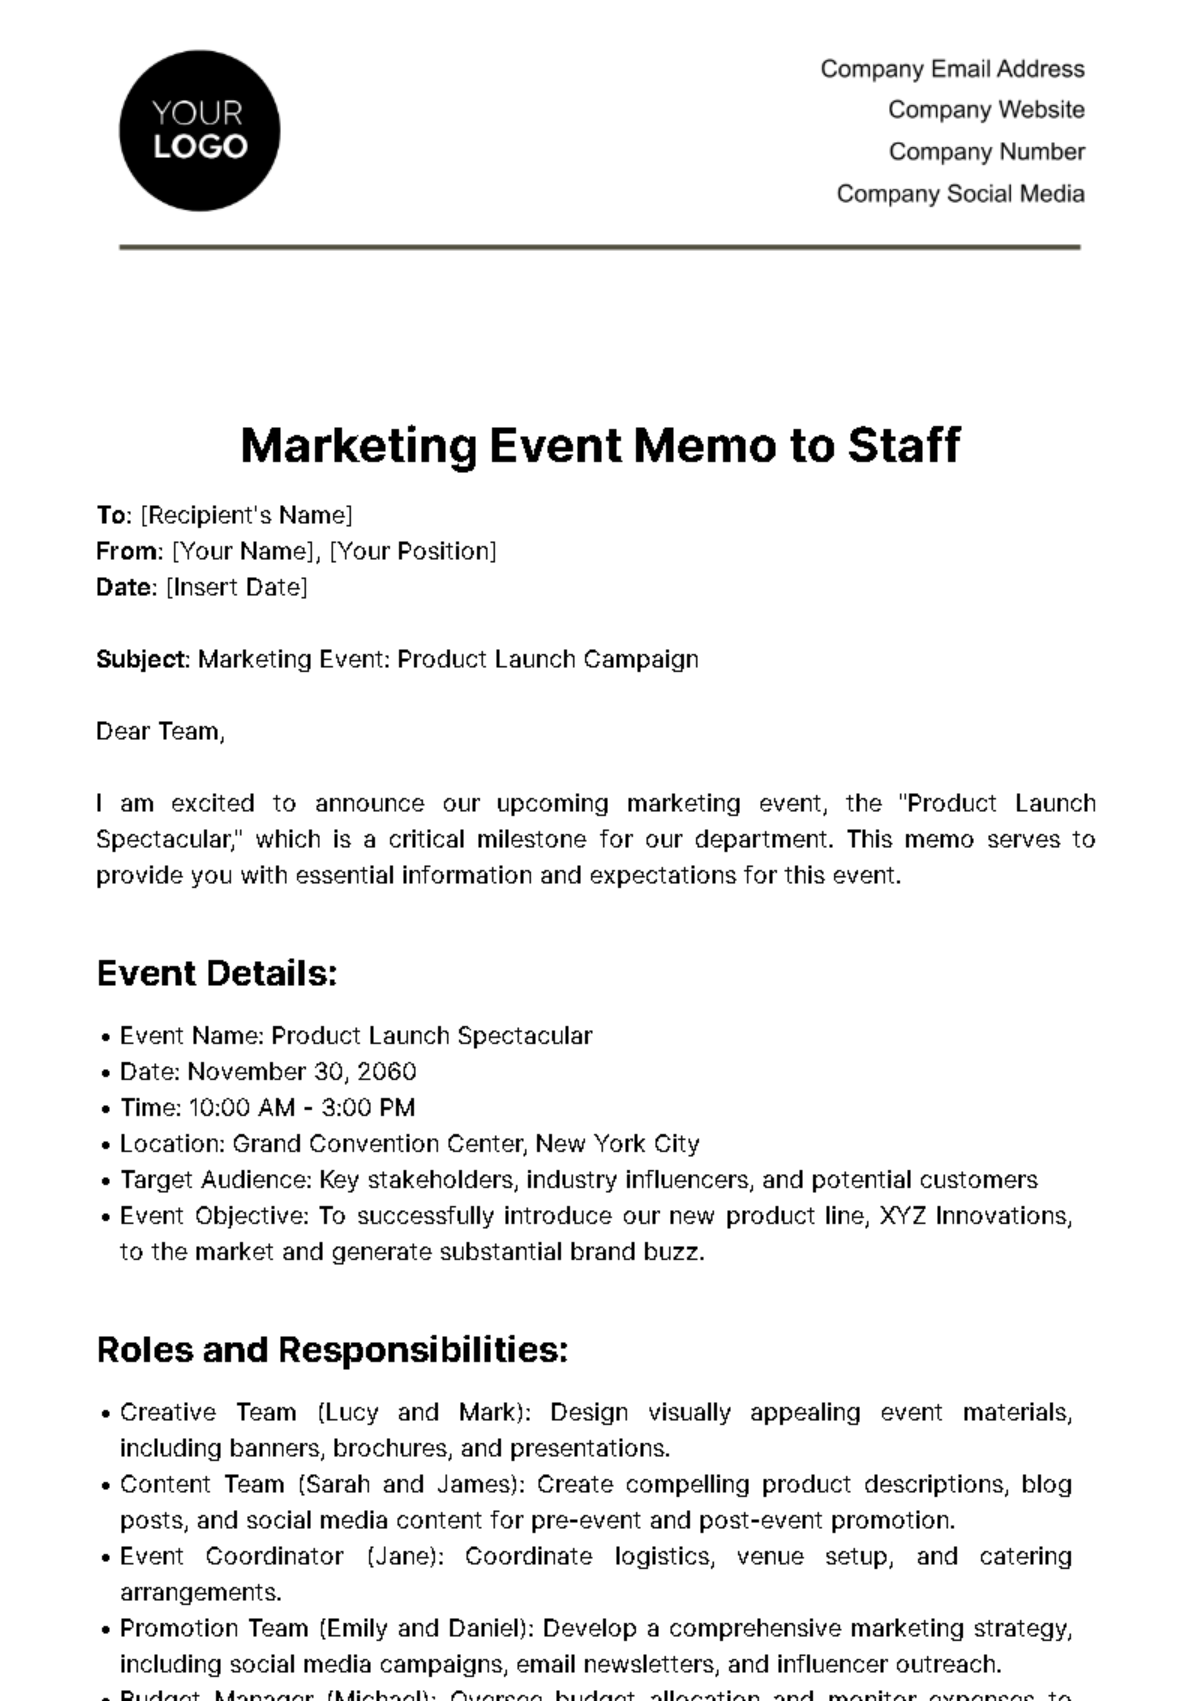 Free Marketing Event Memo to Staff Template